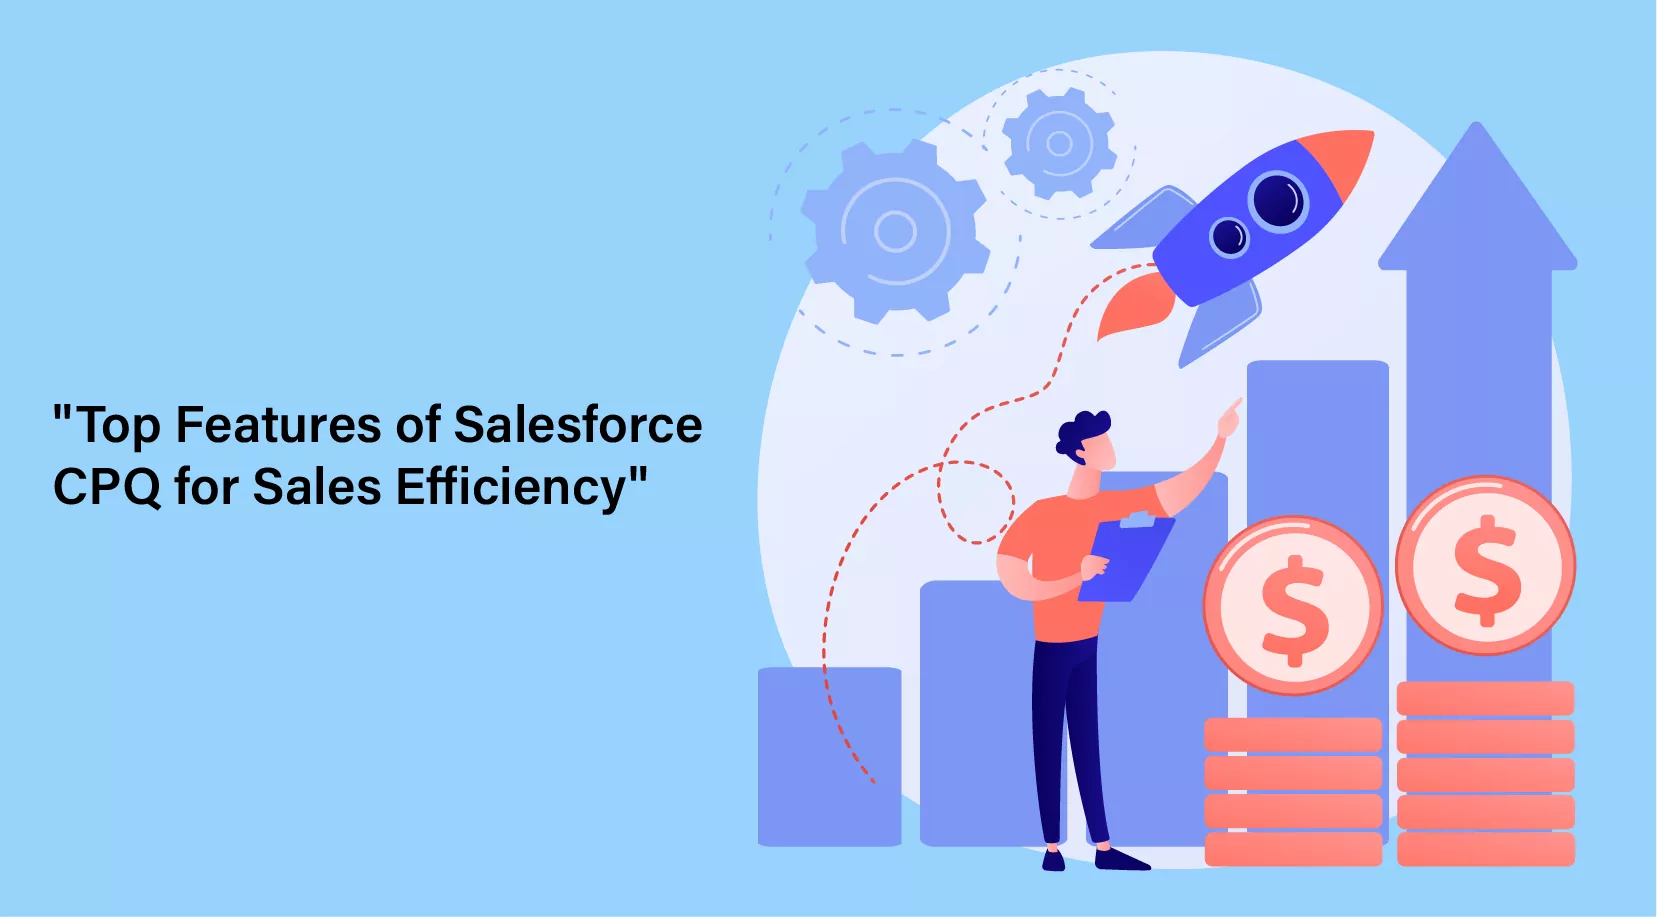 “Top Features of Salesforce CPQ for Sales Efficiency”